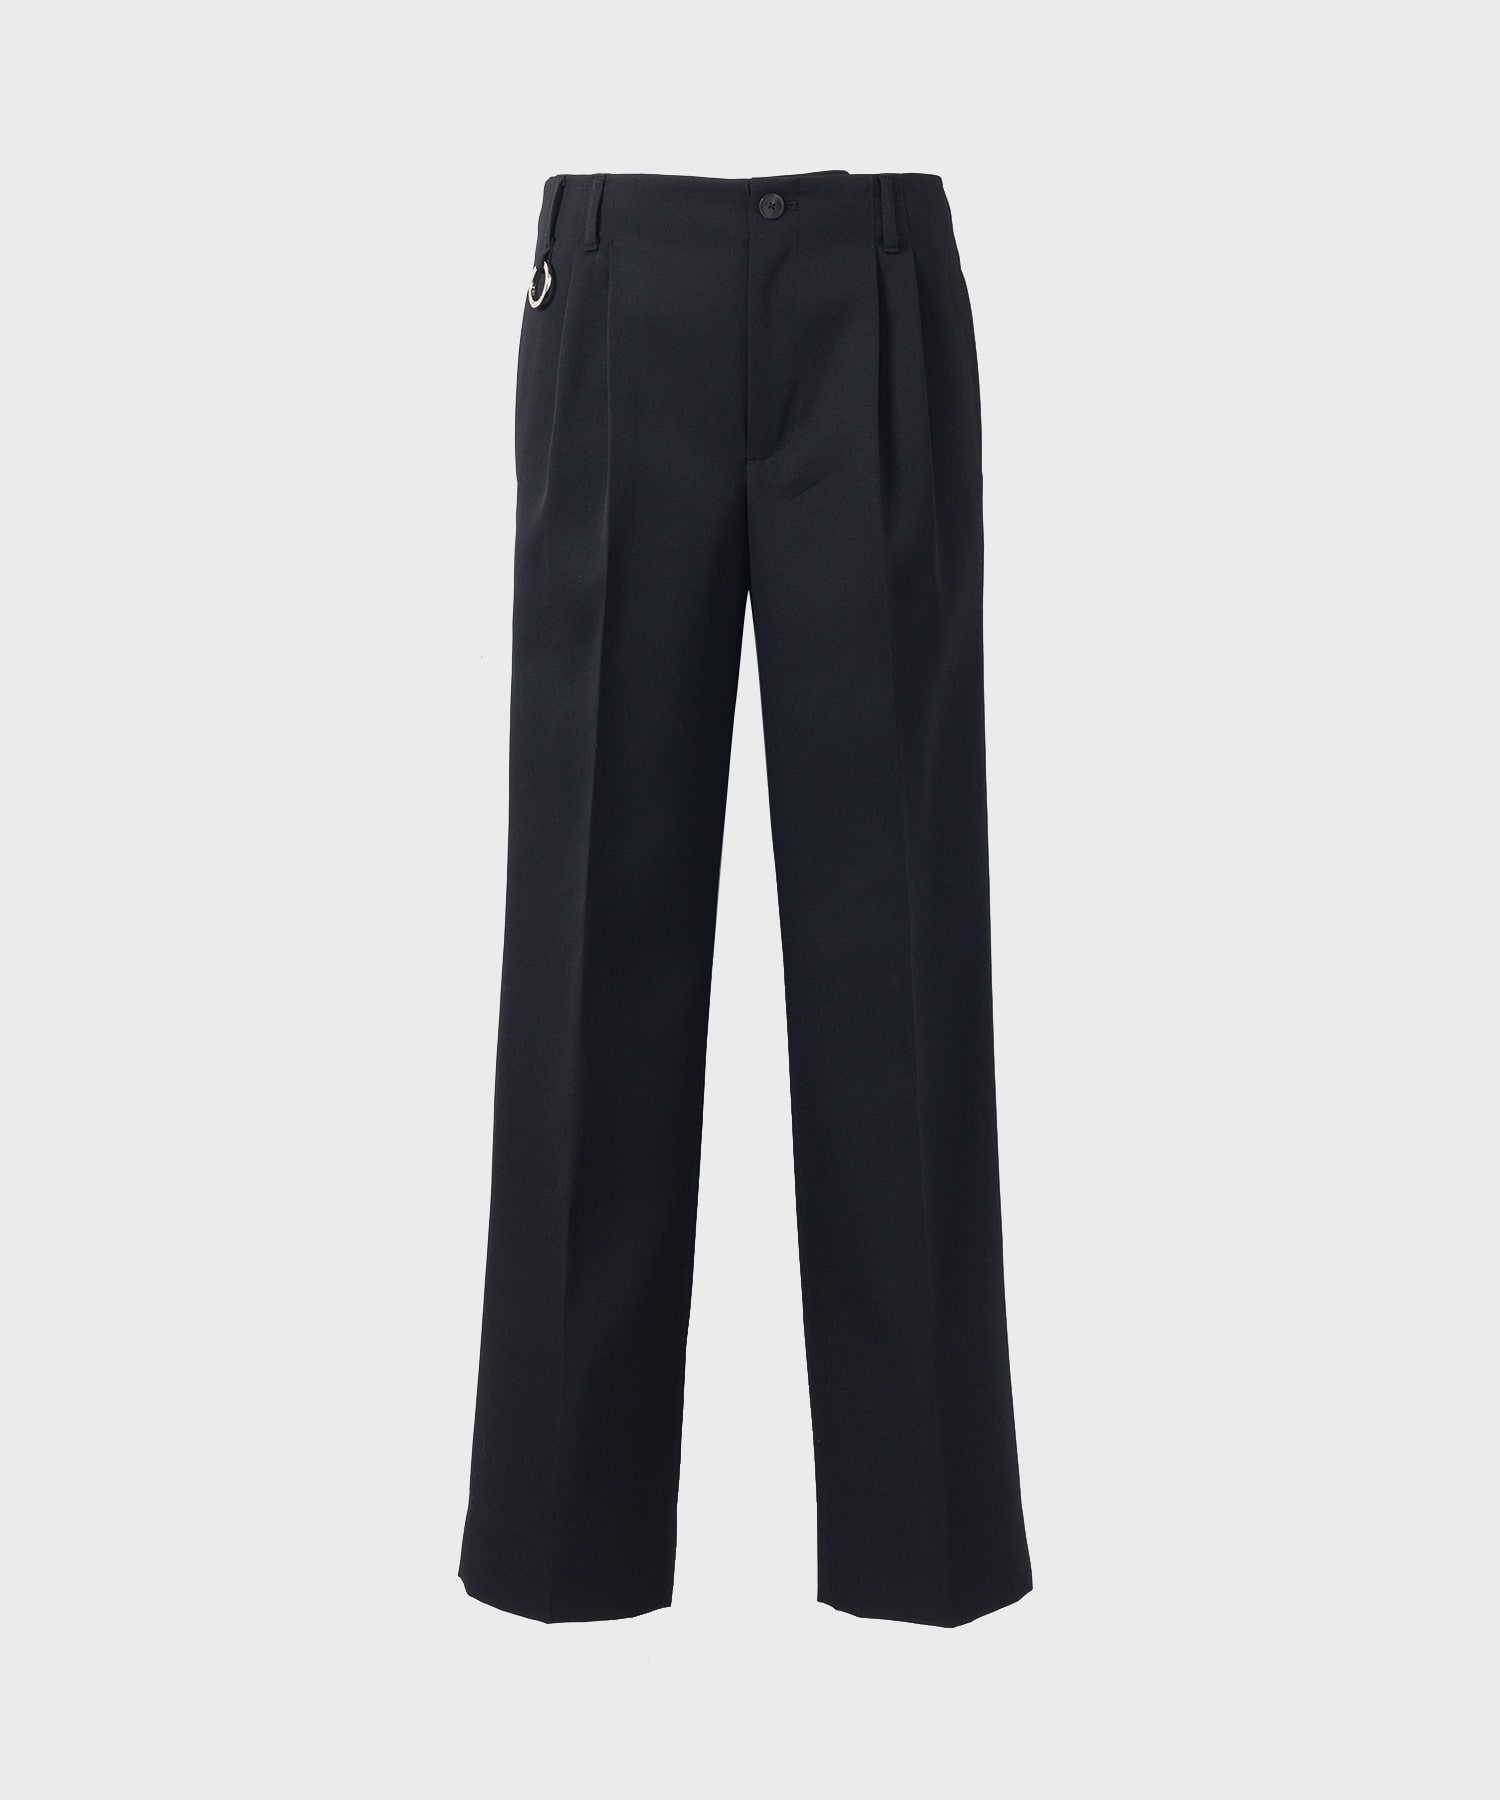 QUINN/Wide Tailored Pants th products